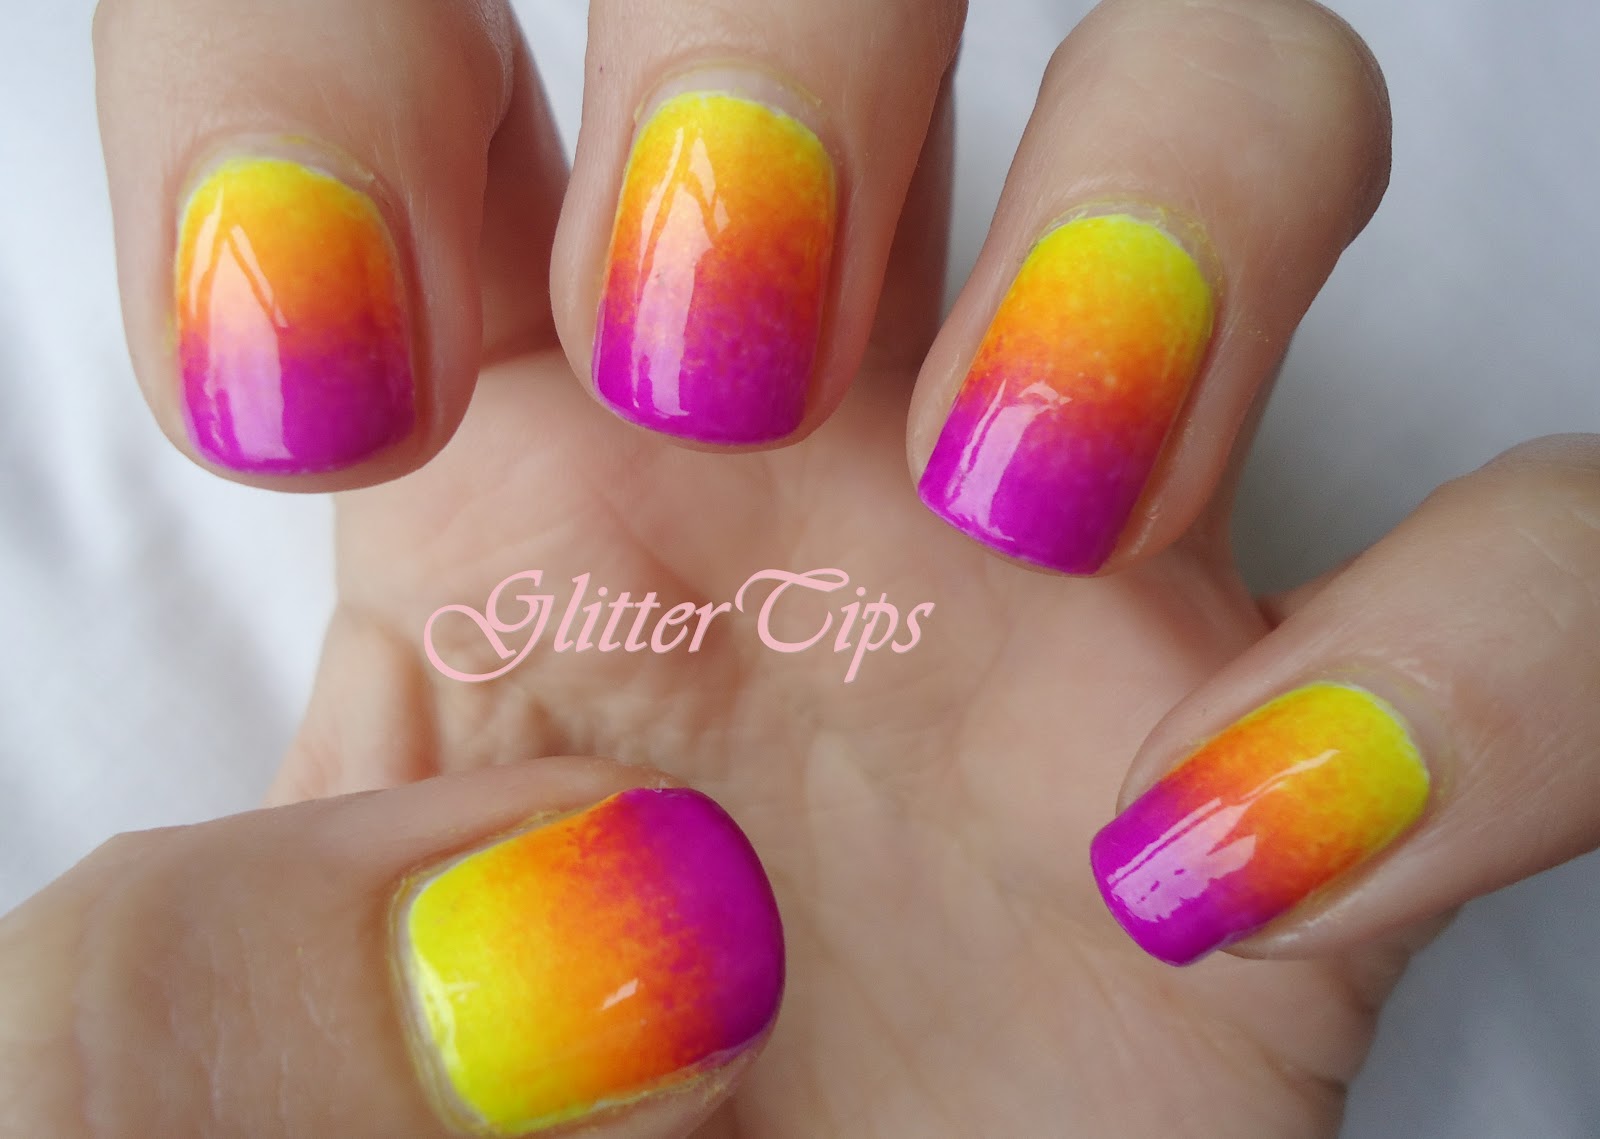 10. Glitter Gradient Nails for the Holidays - wide 4